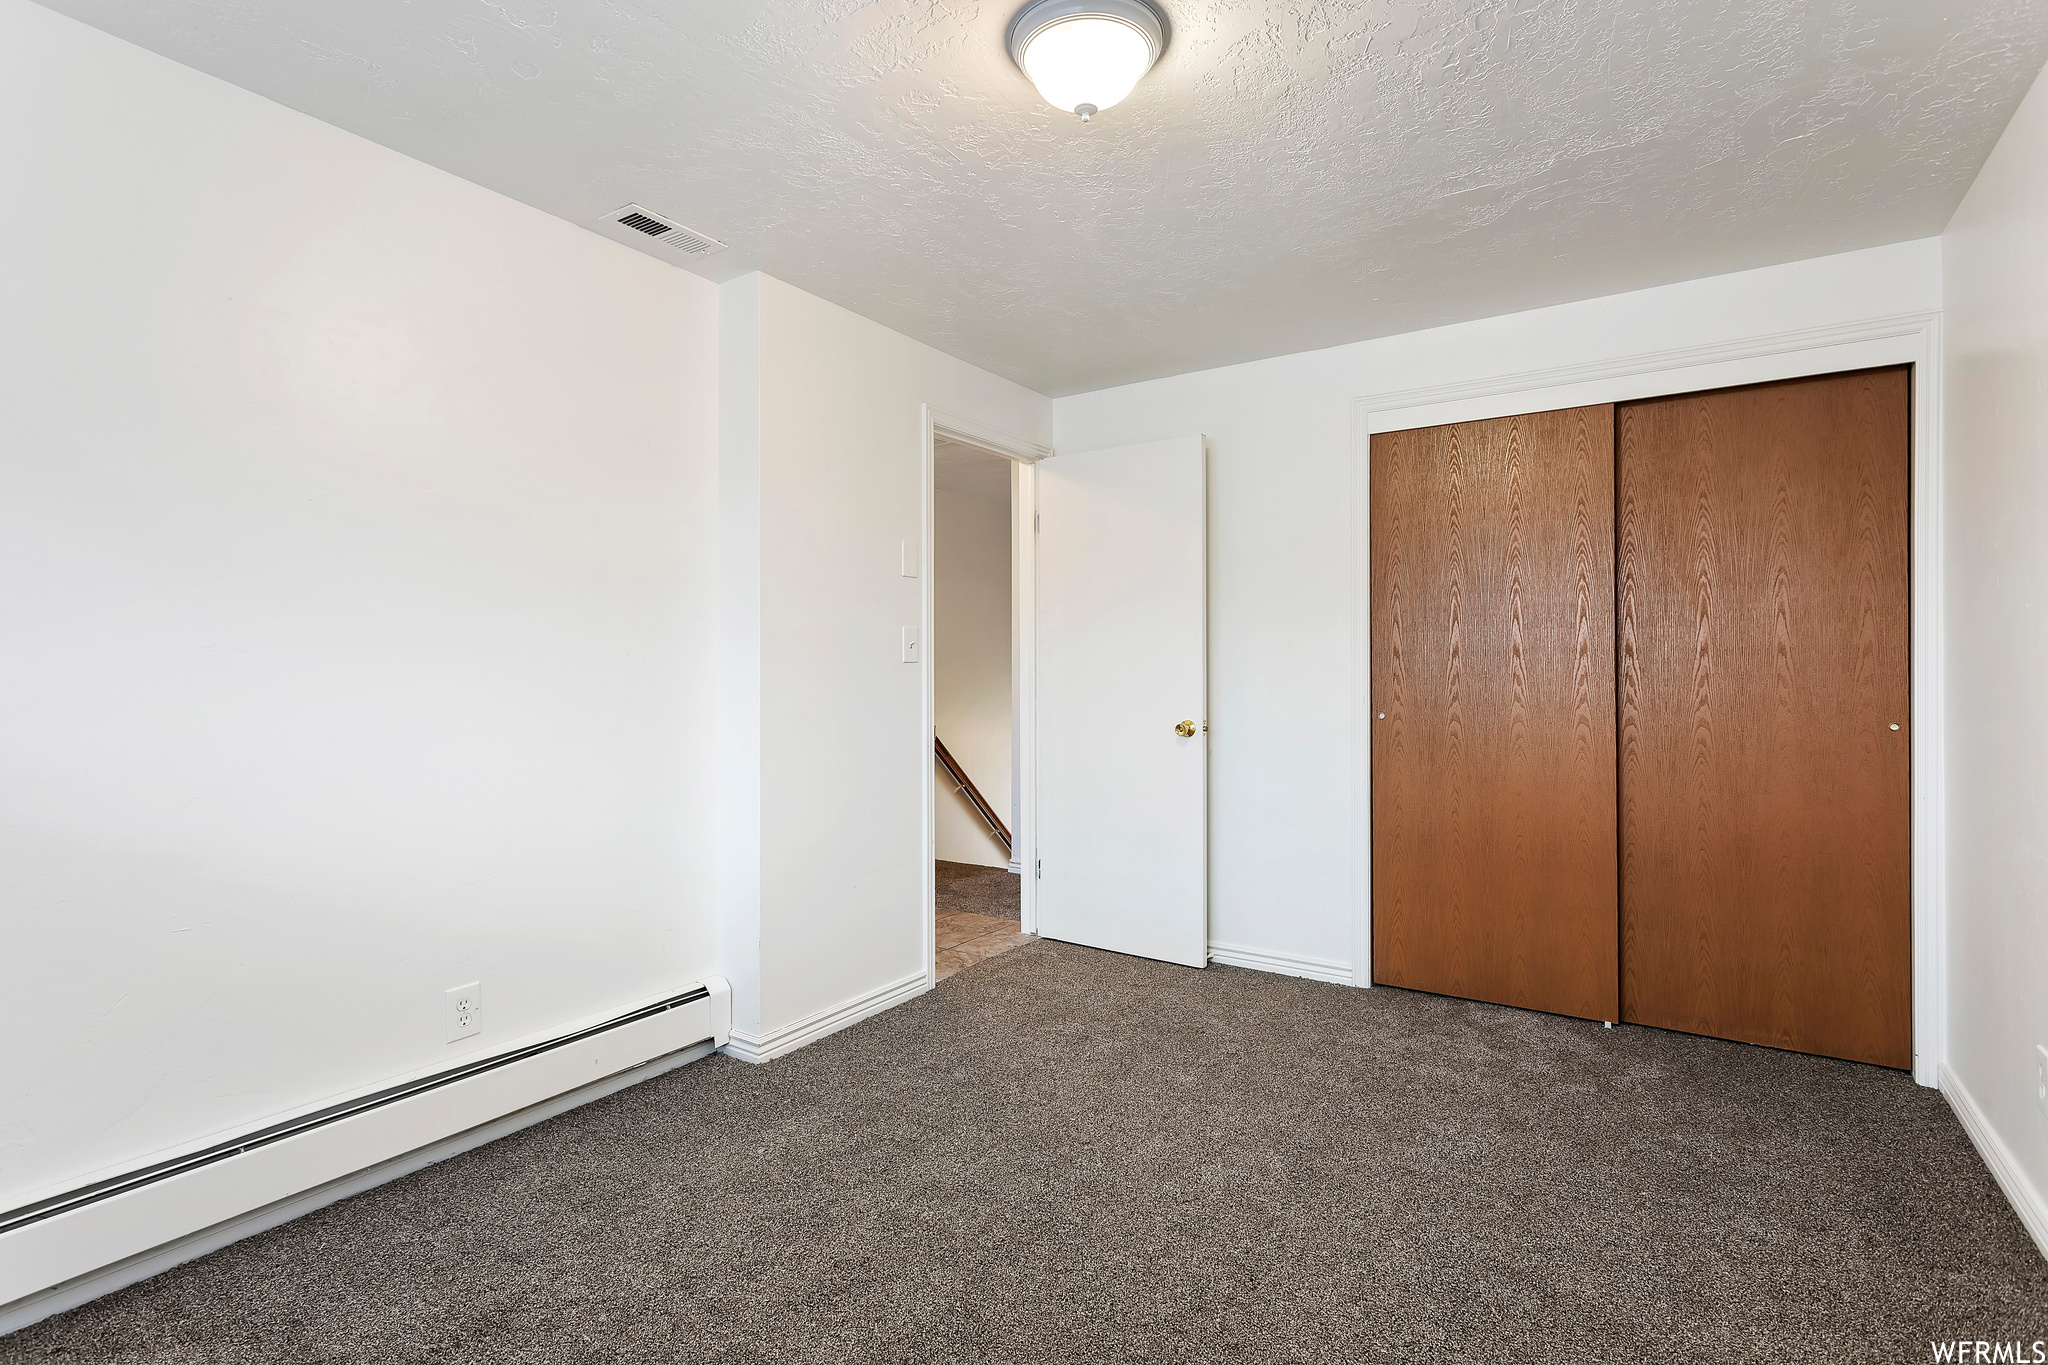 Unfurnished bedroom with dark carpet, a closet, baseboard heating, and a textured ceiling